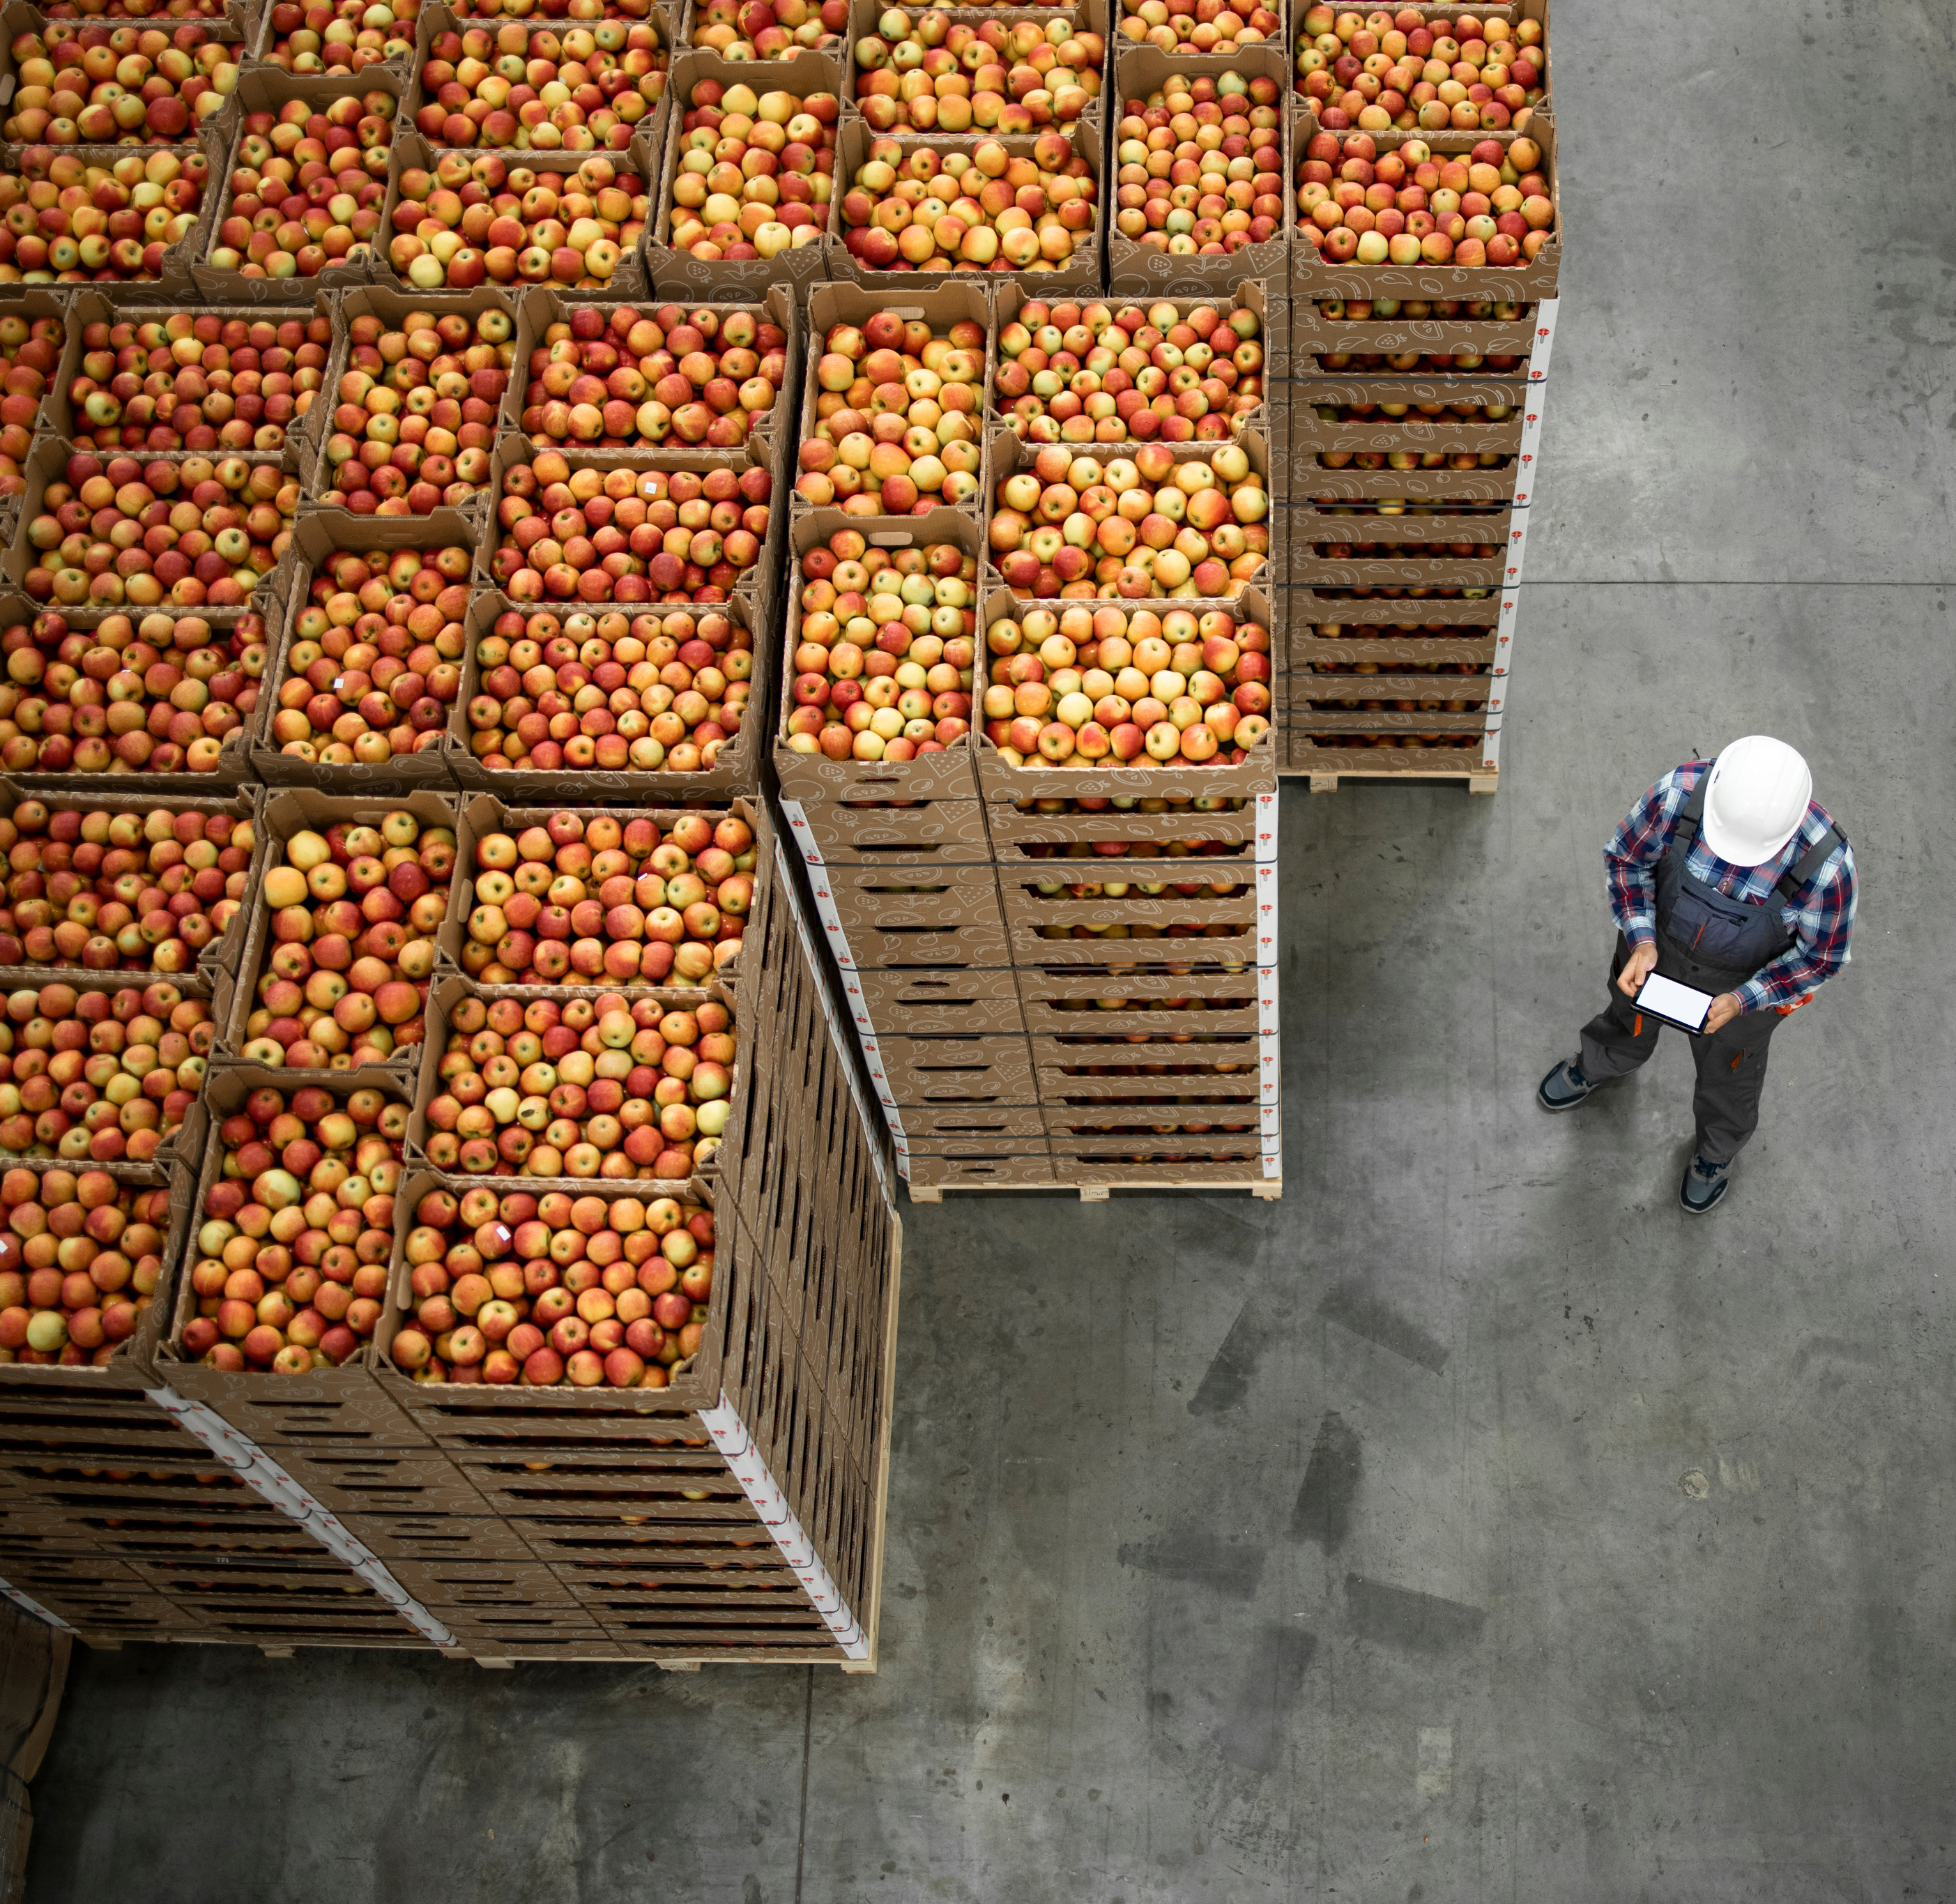 Man standing next to pallets of apple produce